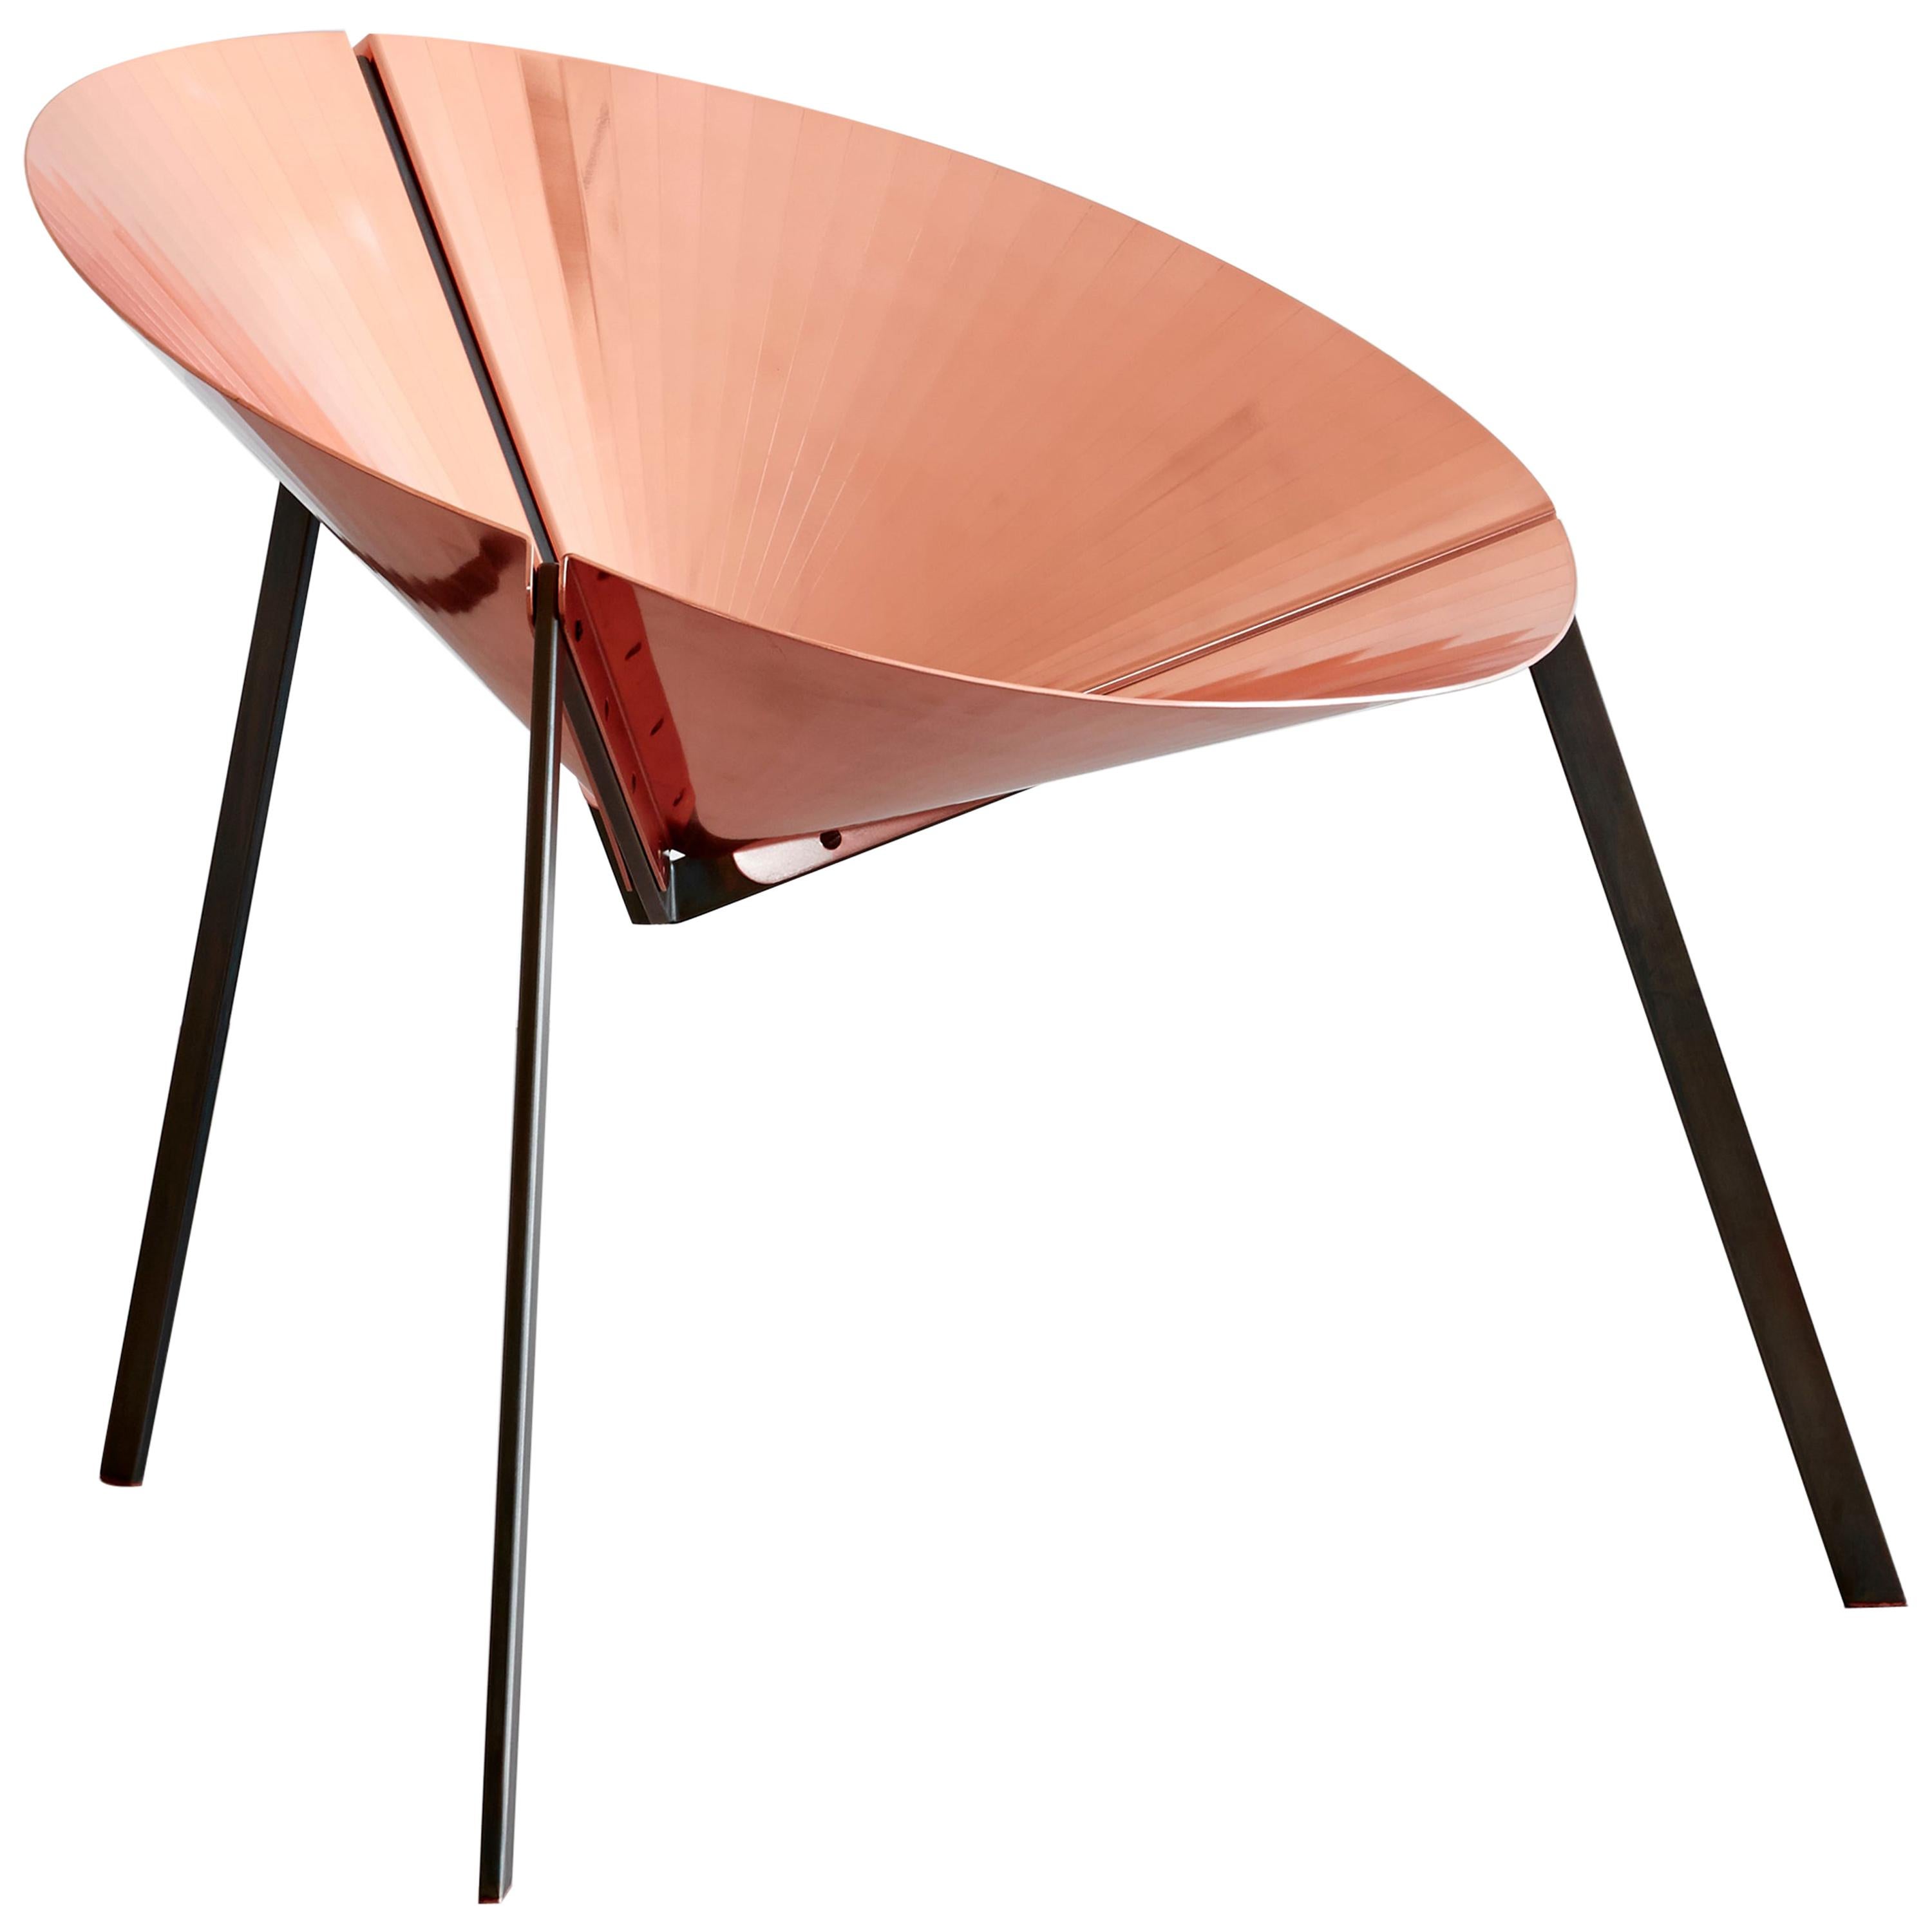 DeCastelli Pensando Ad Acapulco Chair in Polished Copper by IvDesign